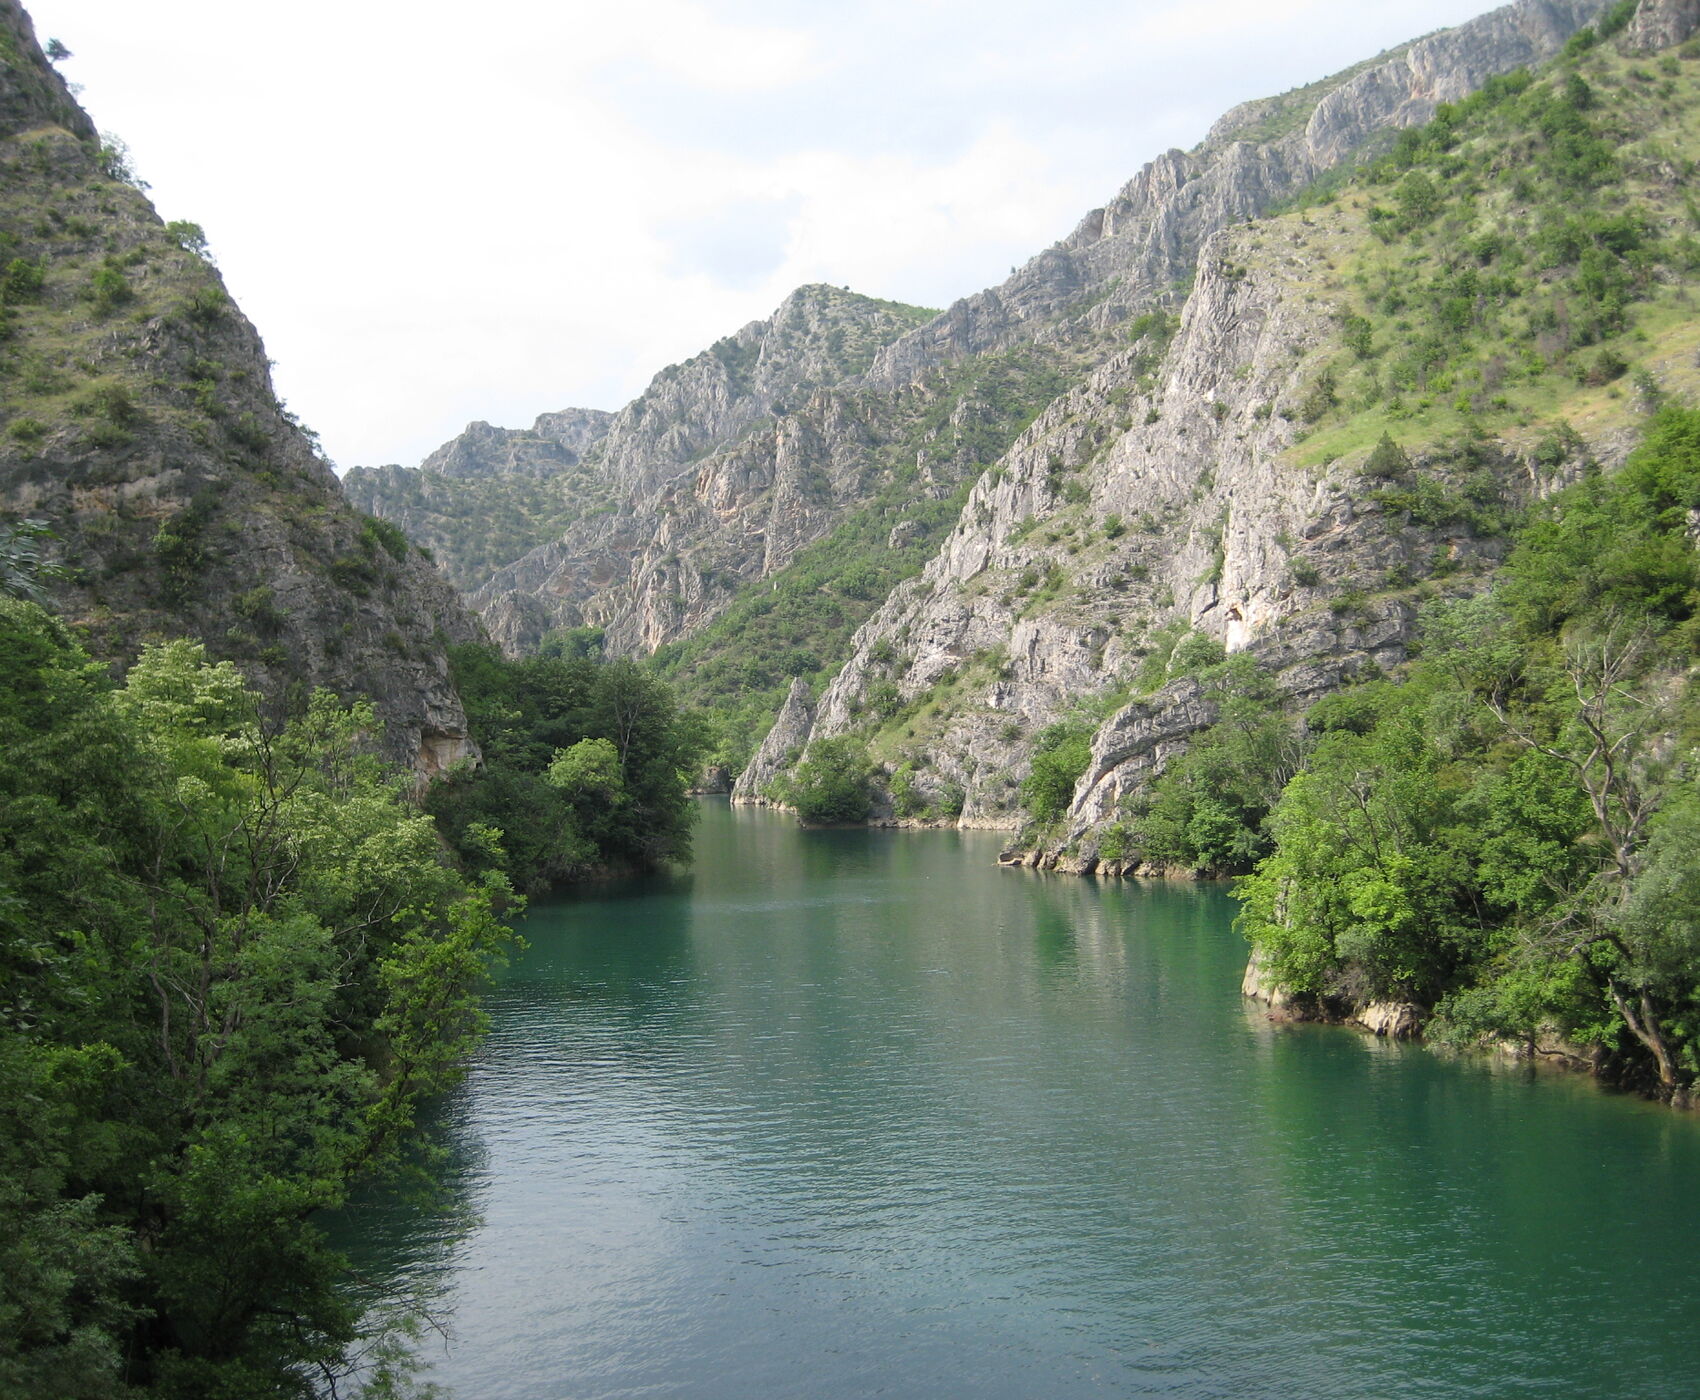 GREAT BALKAN TOUR FROM ANTALYA TO SKOPJE WITH DIRECT FLIGHT